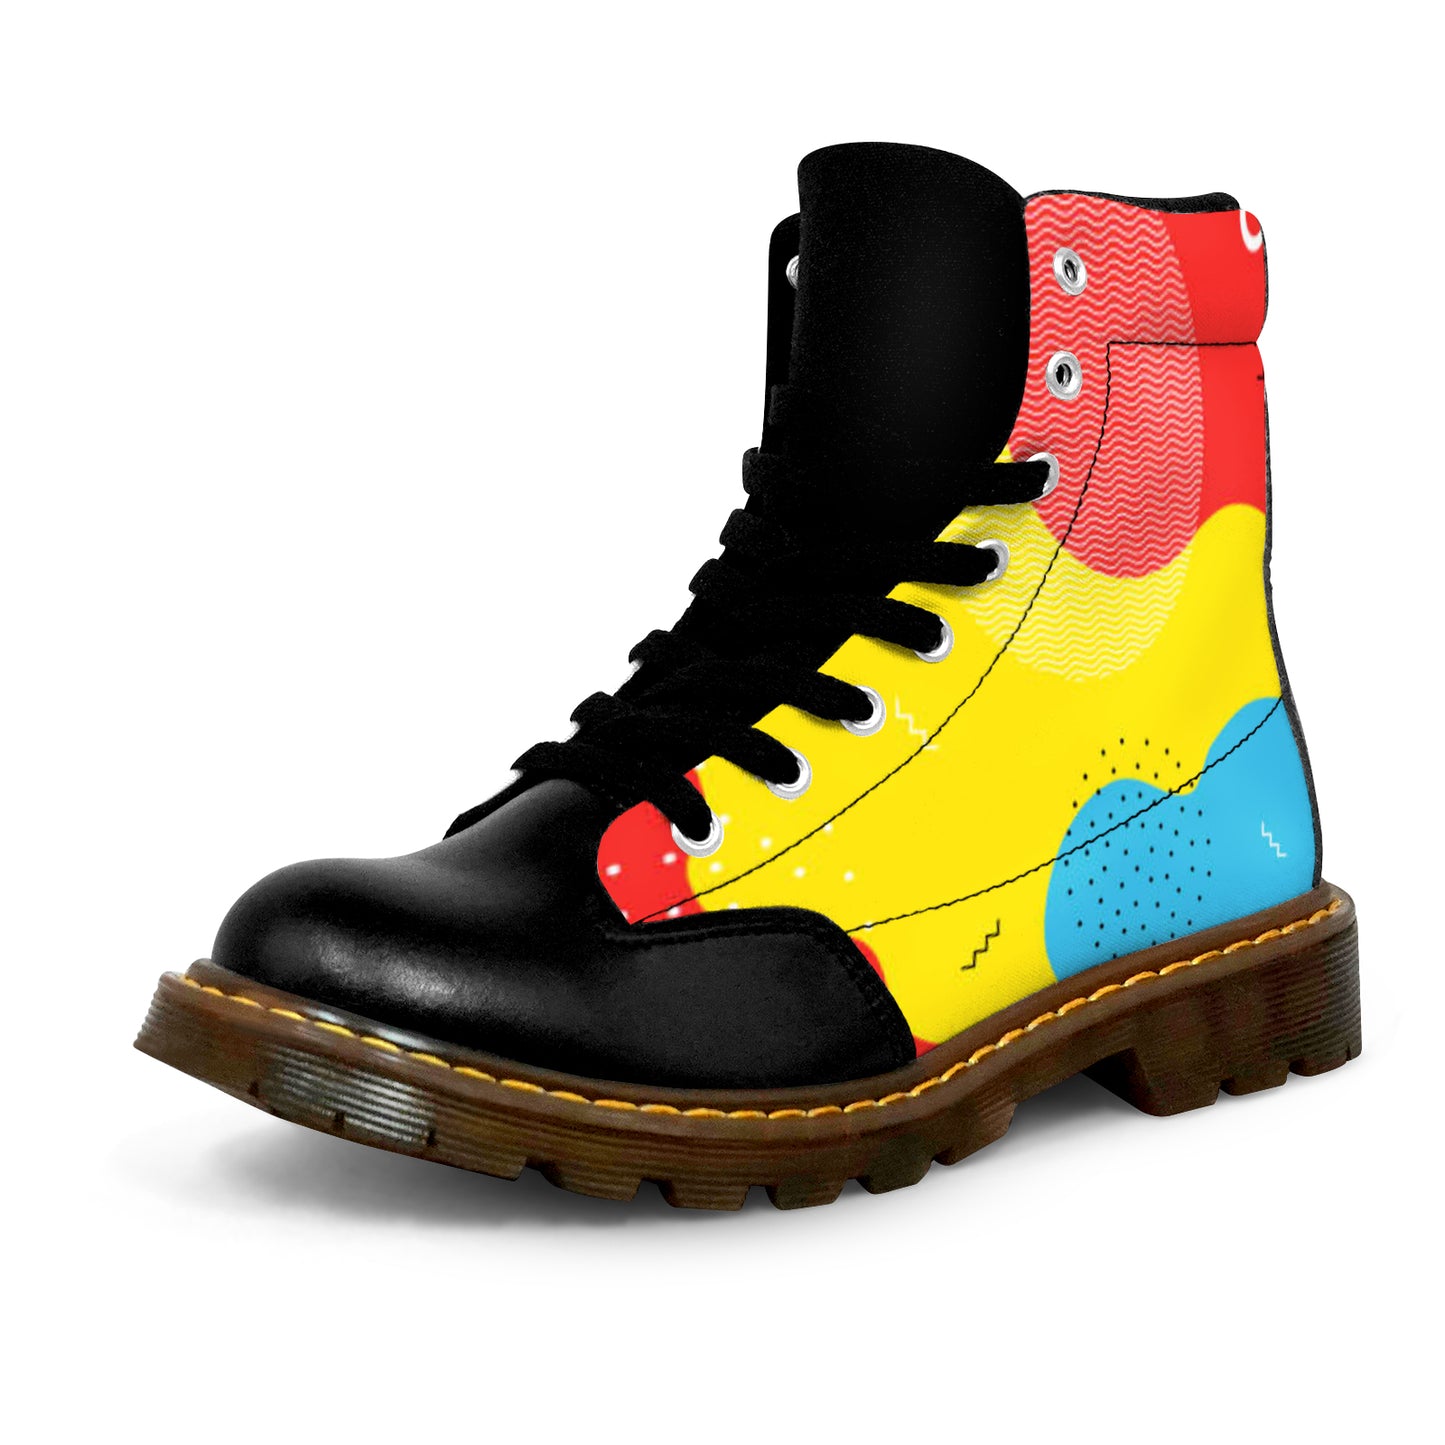 Winter Round Toe Women's Boots - Yellow/Blue/Red